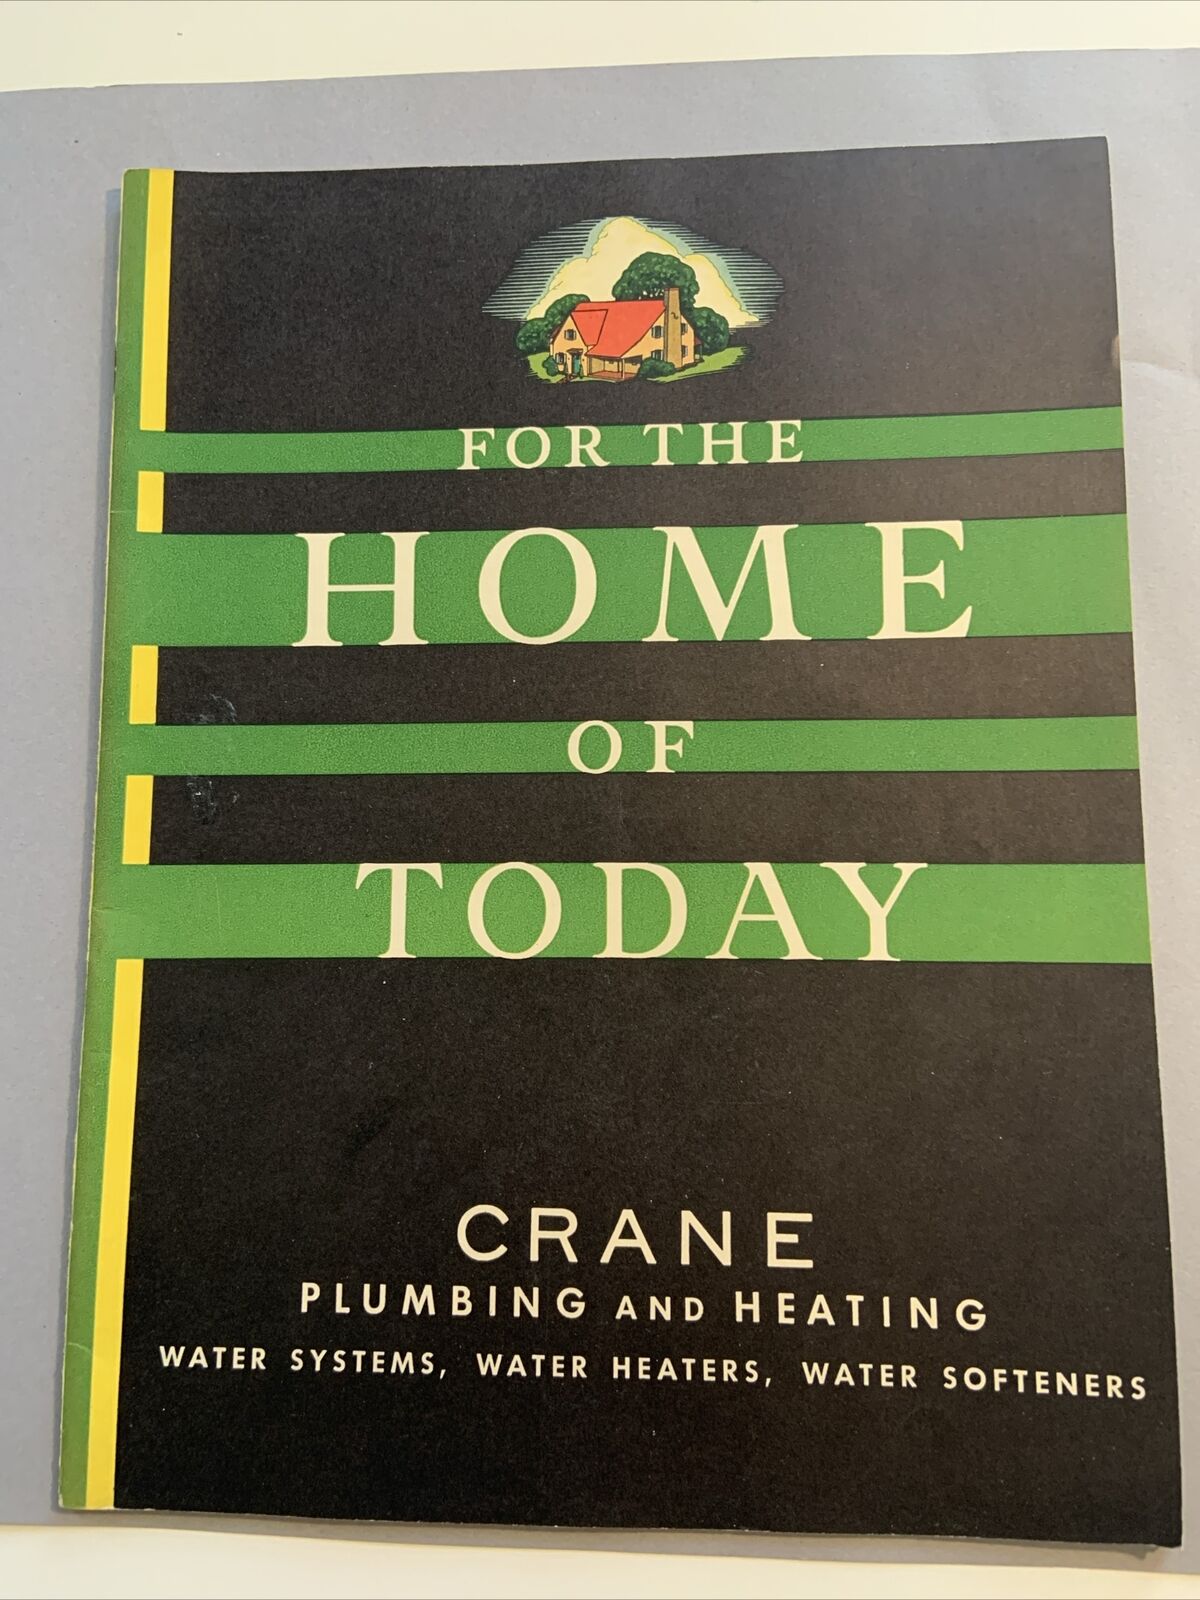 Vtg. 1934 Crane Plumbing and Heating Catalog, For the Home of Today